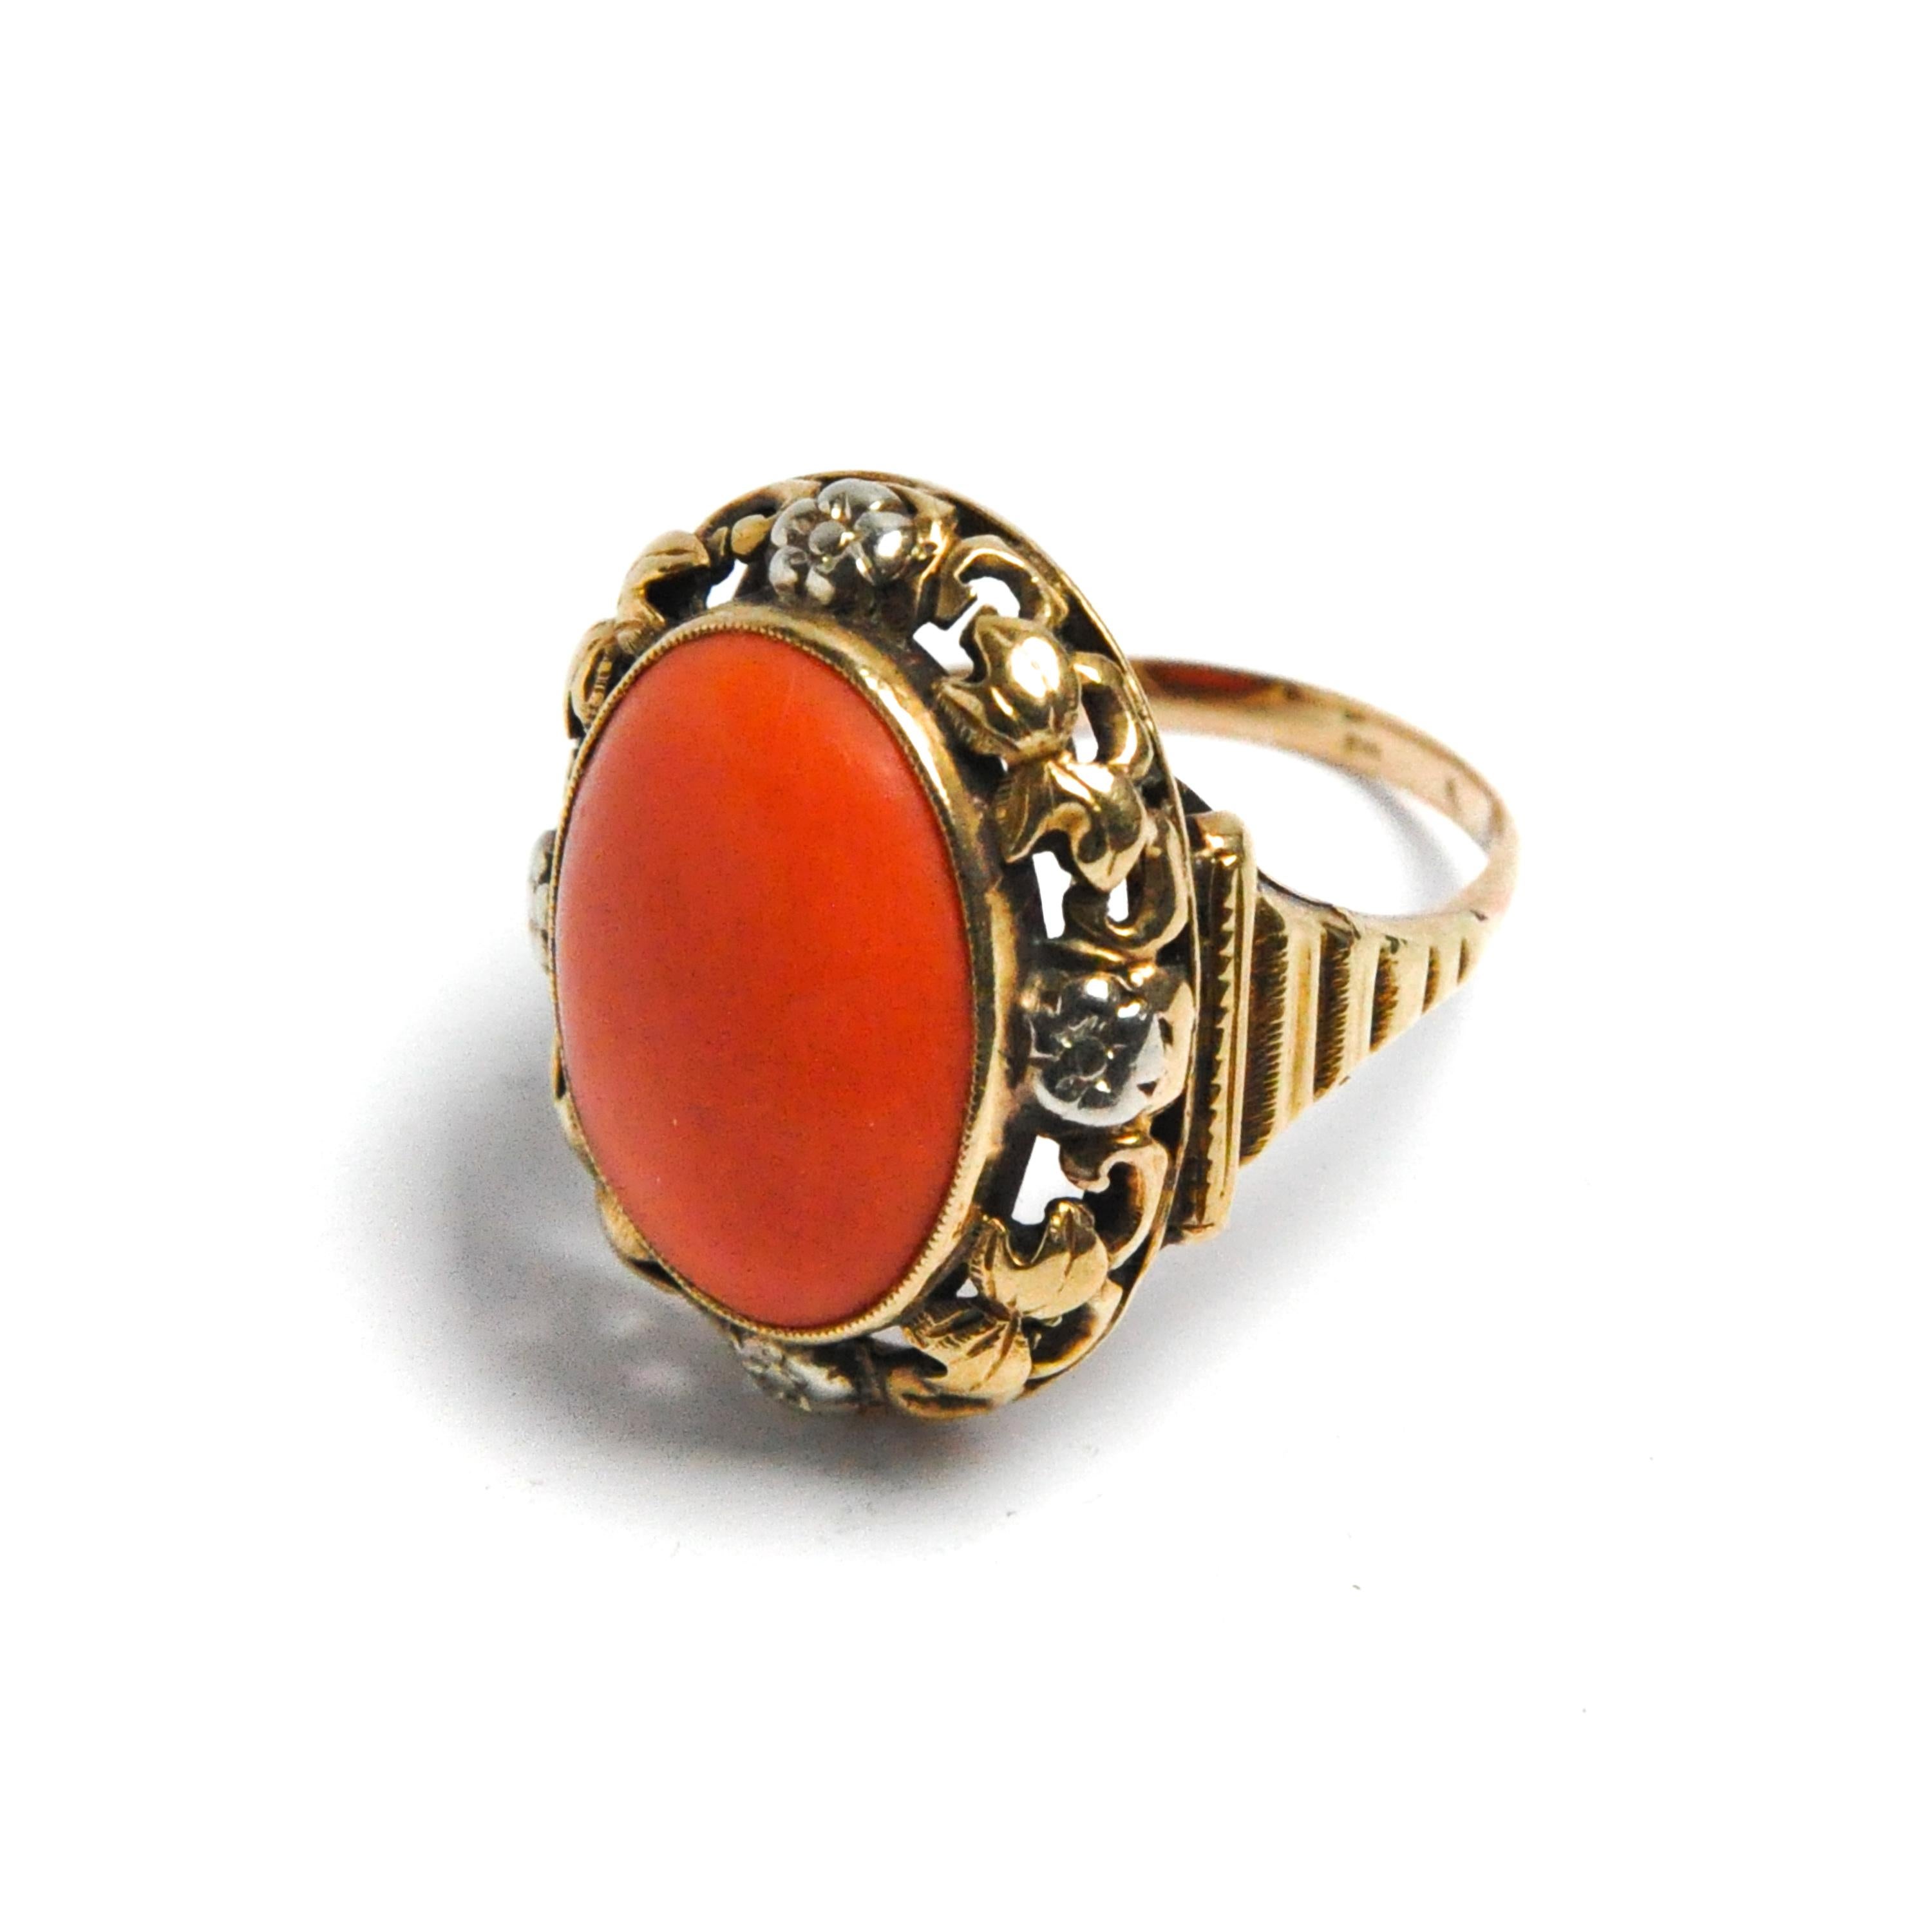 A vintage 14 karat gold ring set with a natural cabochon coral. The coral is set in a rich decorated gold frame. The gold has a beautifully openwork structure with flowers and curls. 

The *coral ring is in good condition. Marked. Tested as 14k